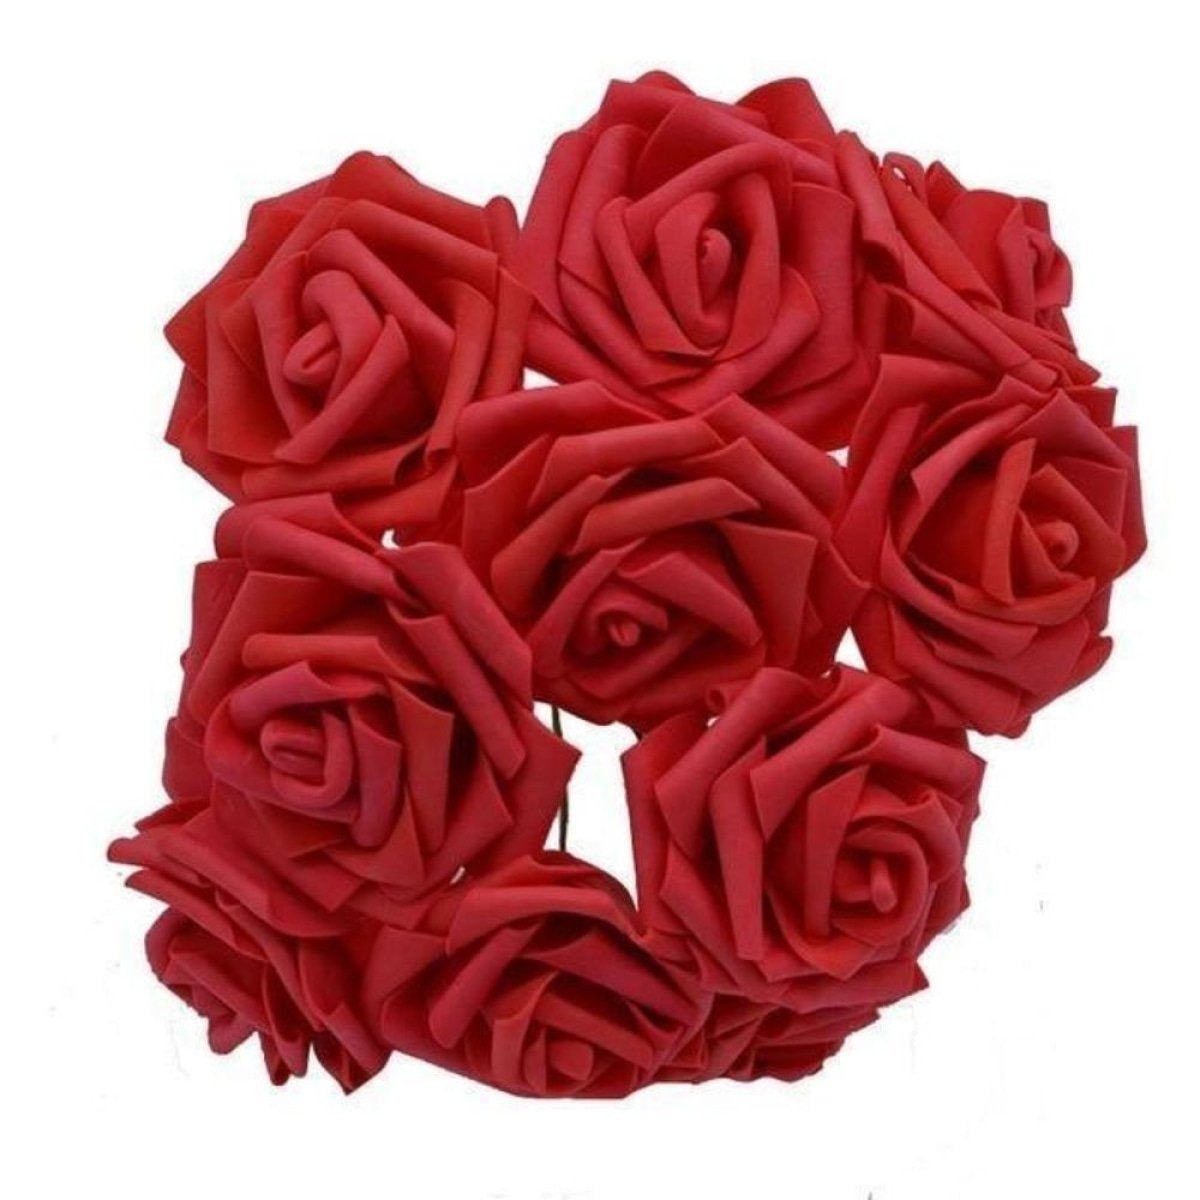 20pcs 7cm Artificial Flowers with Stems Foam Rose Fake Bride Bouquet Wedding - Burgundy - - Asia Sell